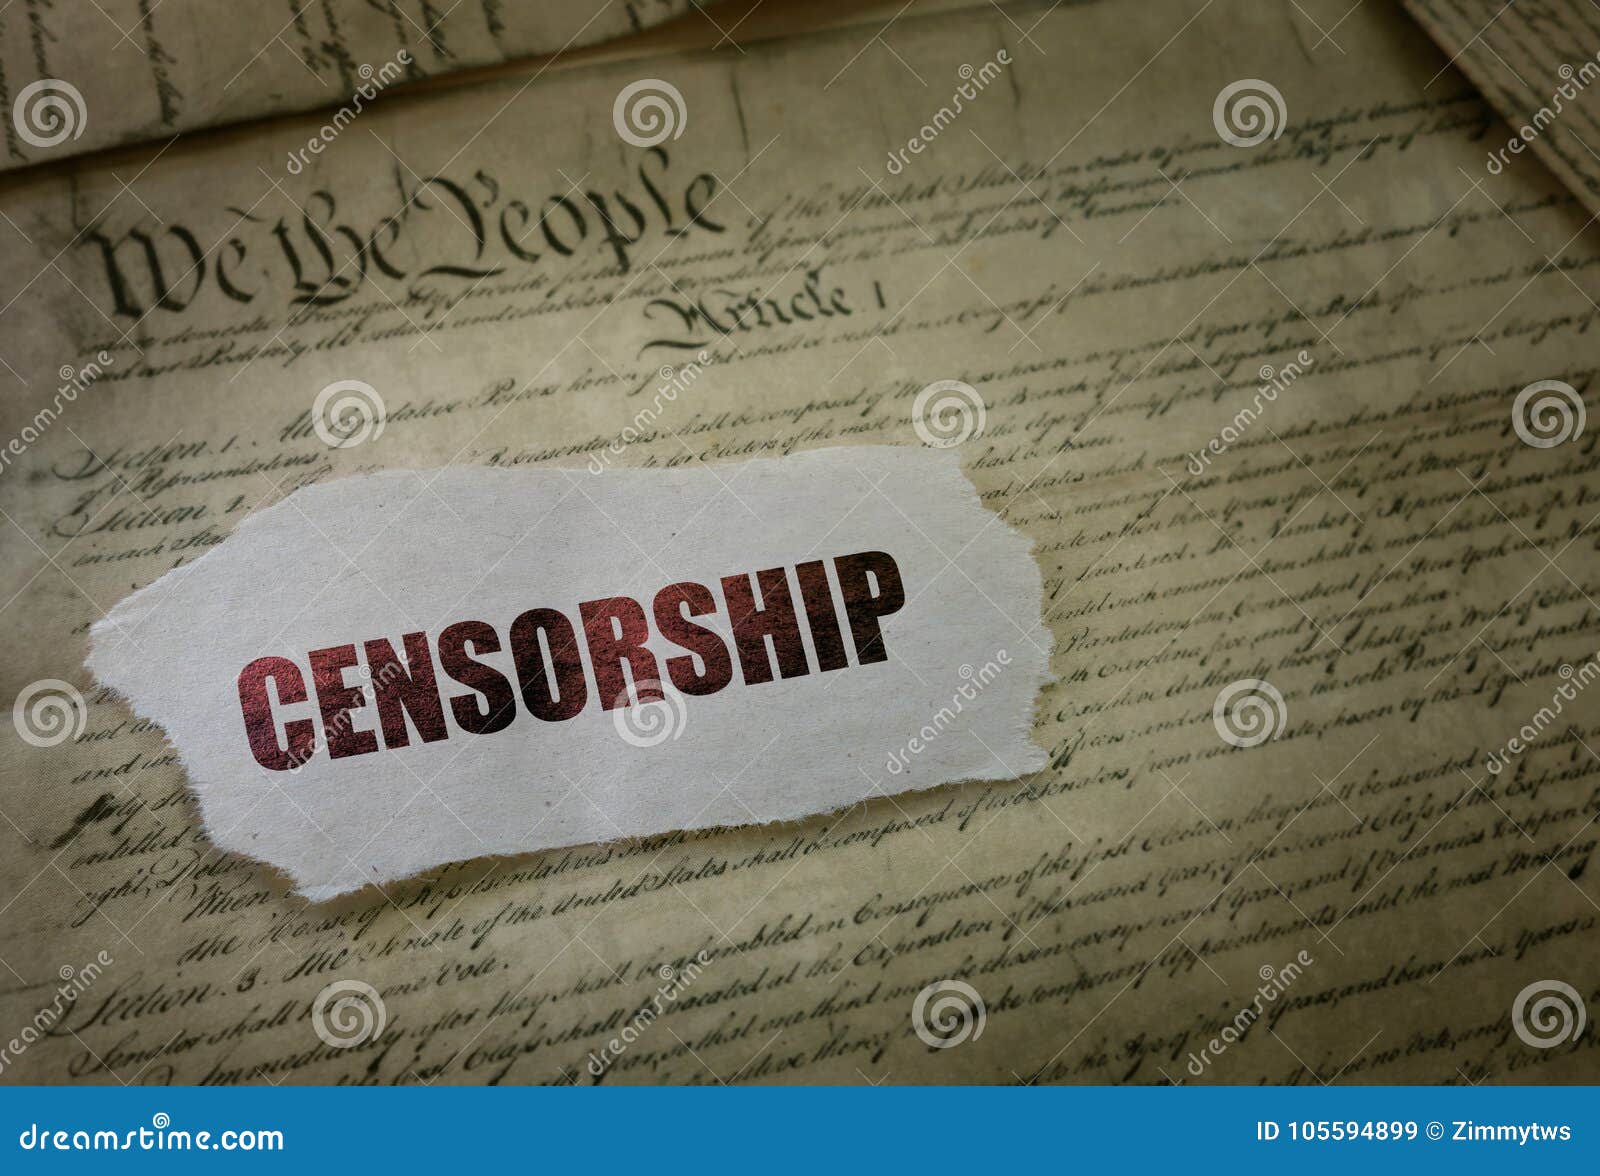 freedom of speech and censorship